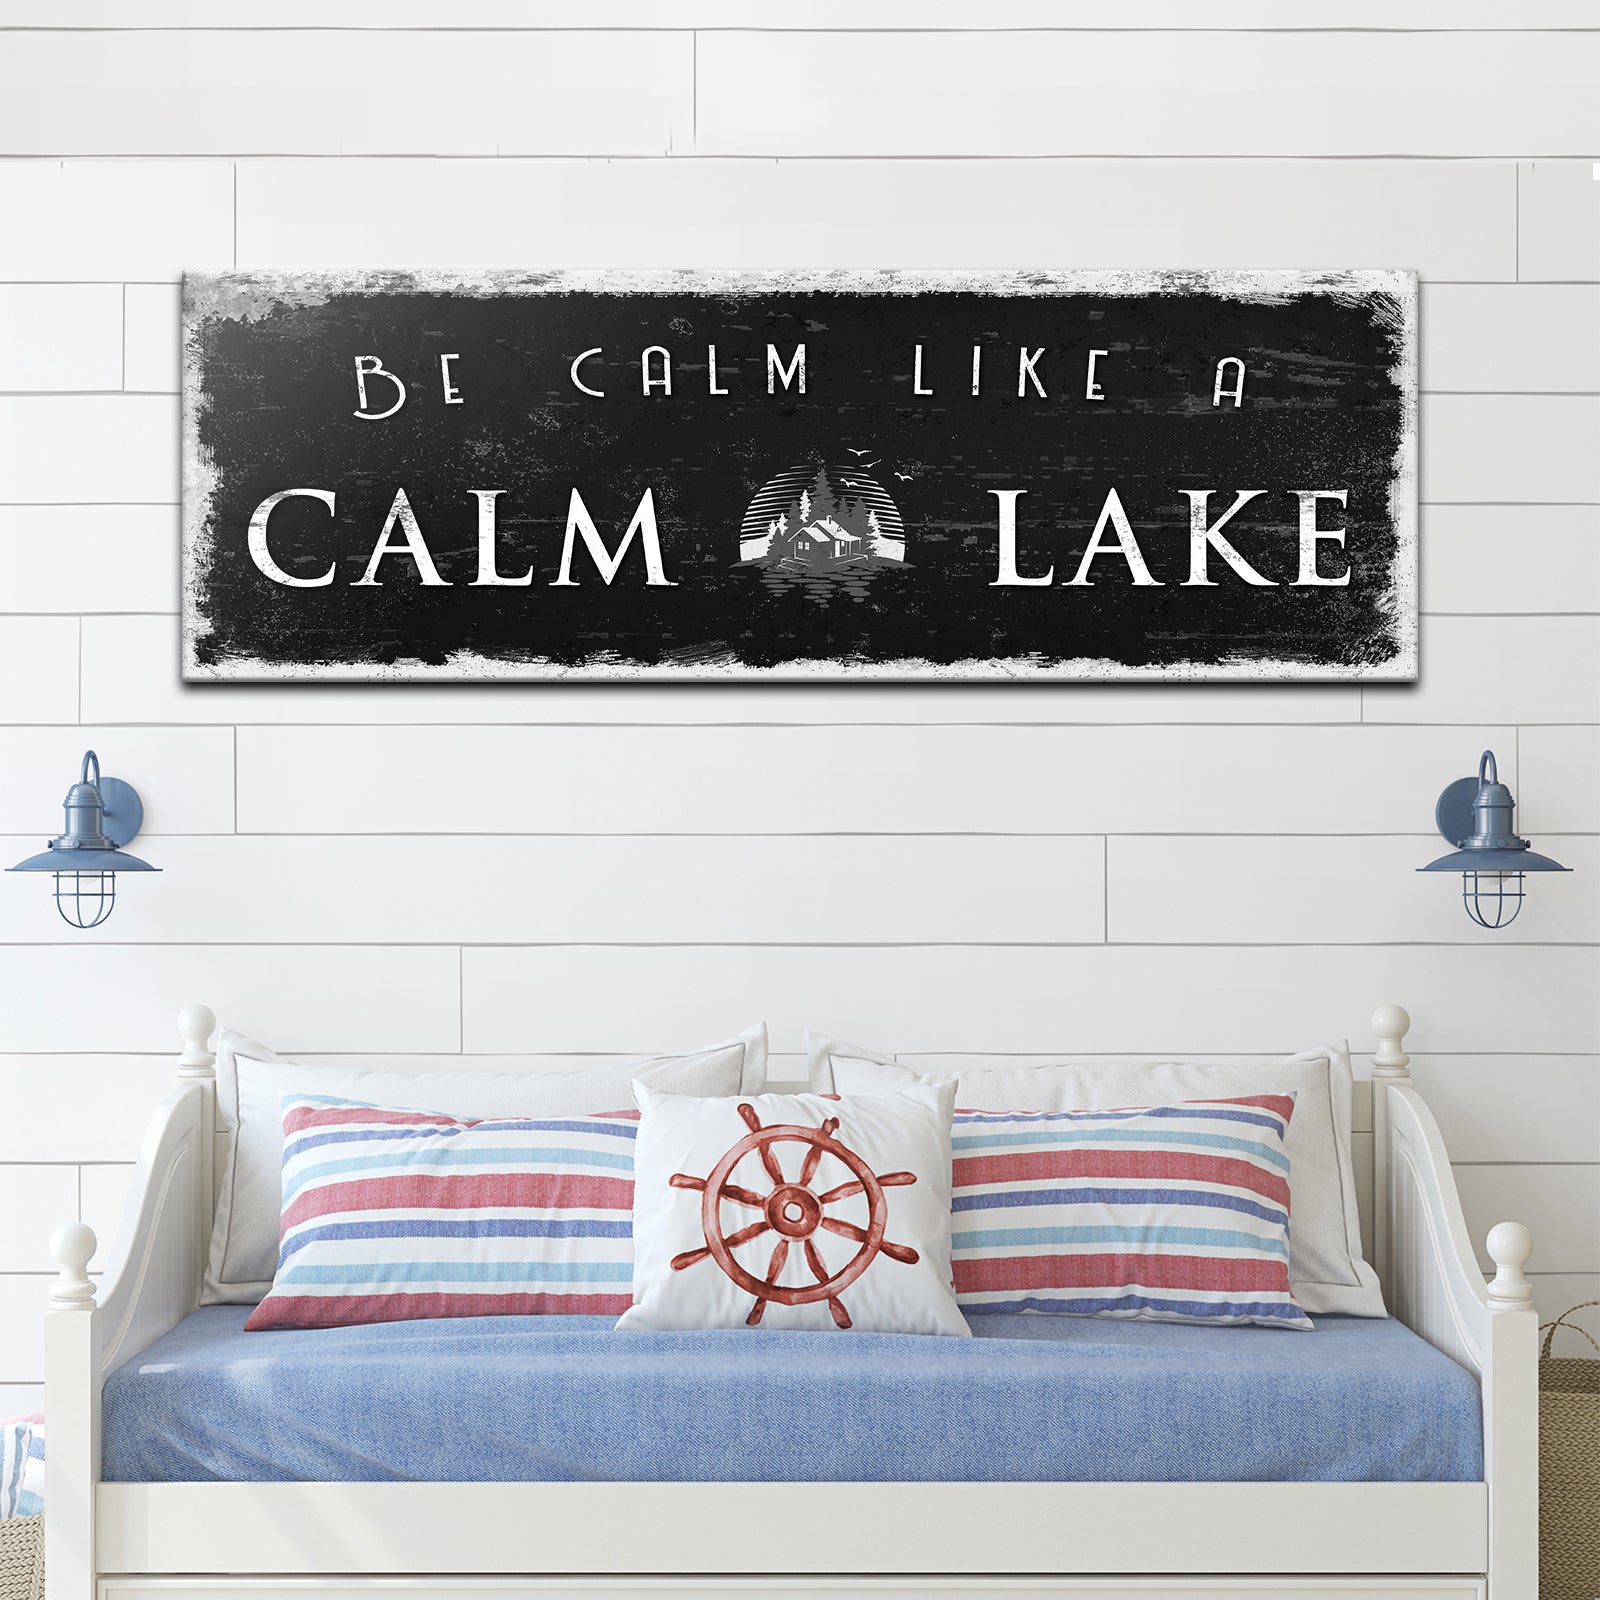 Calm Lake Sign - Image by Tailored Canvases